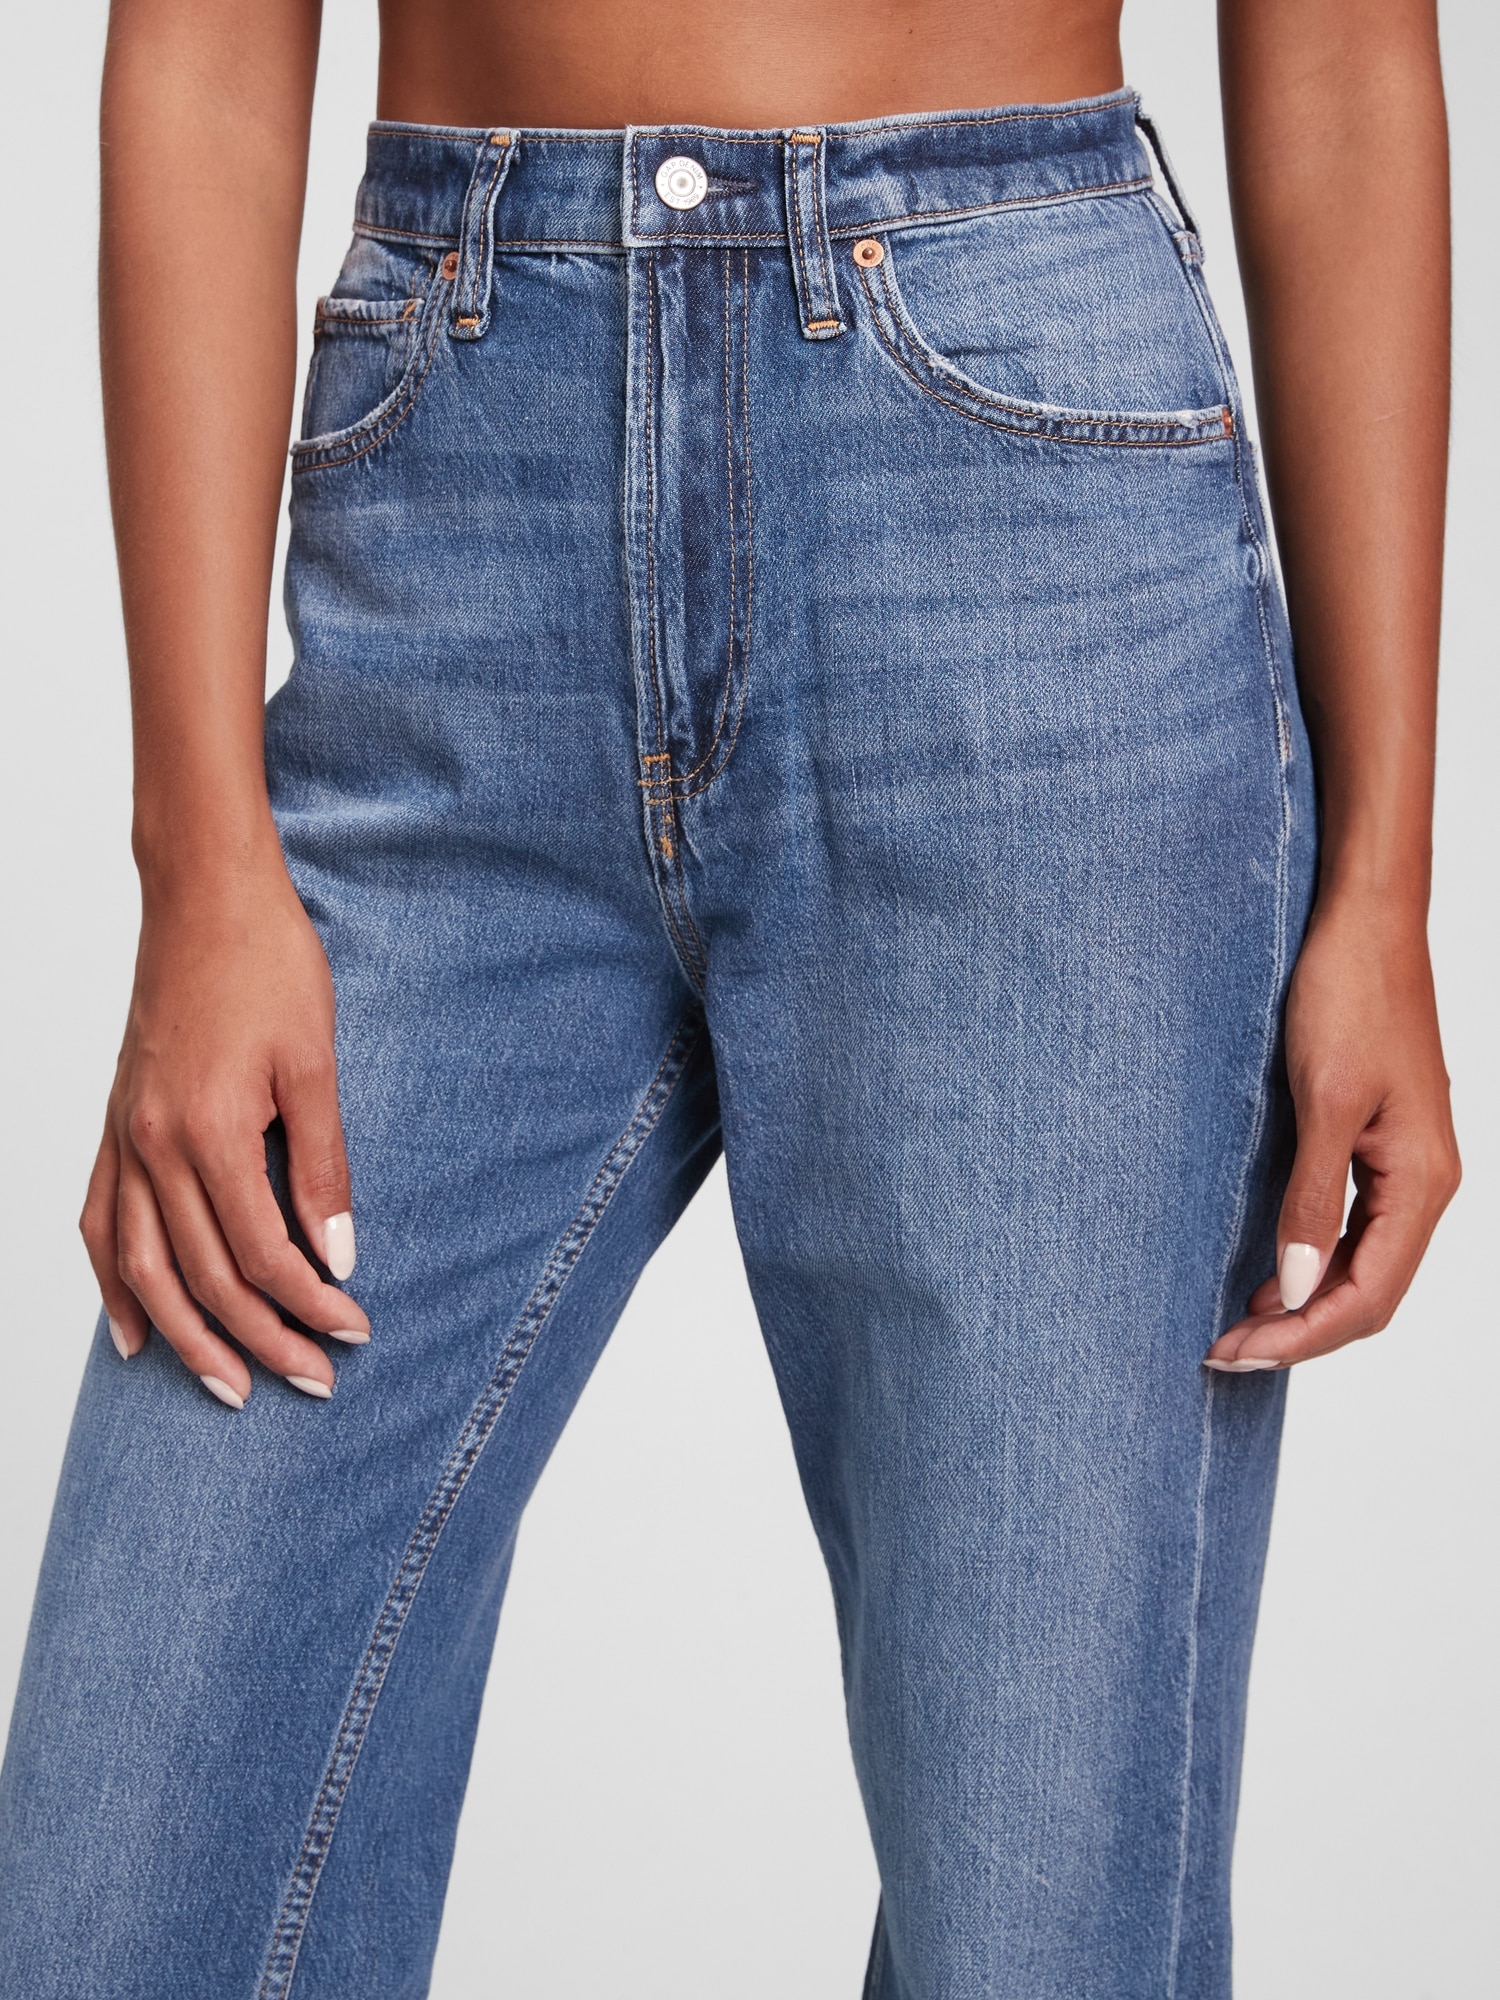 Buy Gap Mid Rise Organic Cotton 90s Loose Washwell Jeans from the Gap  online shop